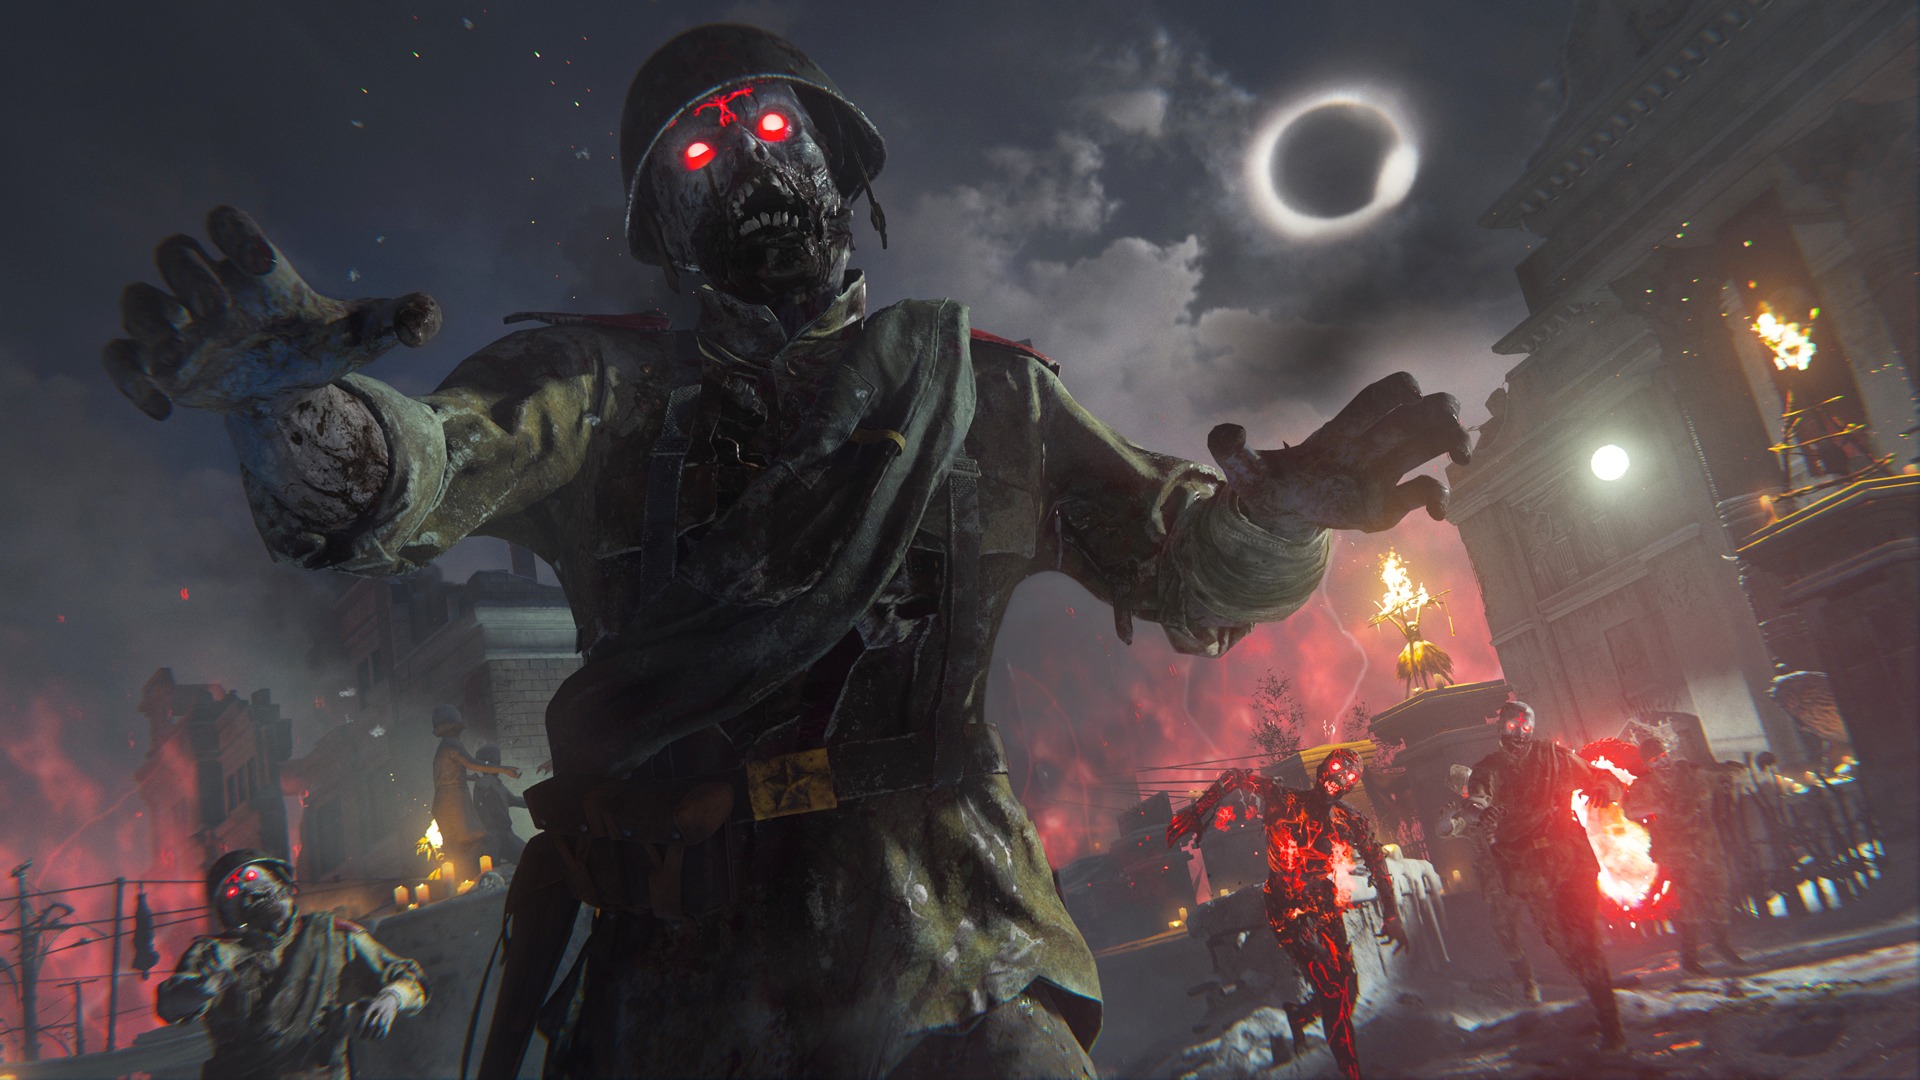 Call of Duty Vanguard Zombies perks: A Zombie wearing a soldier's uniform walking towards the camera with its arms out.